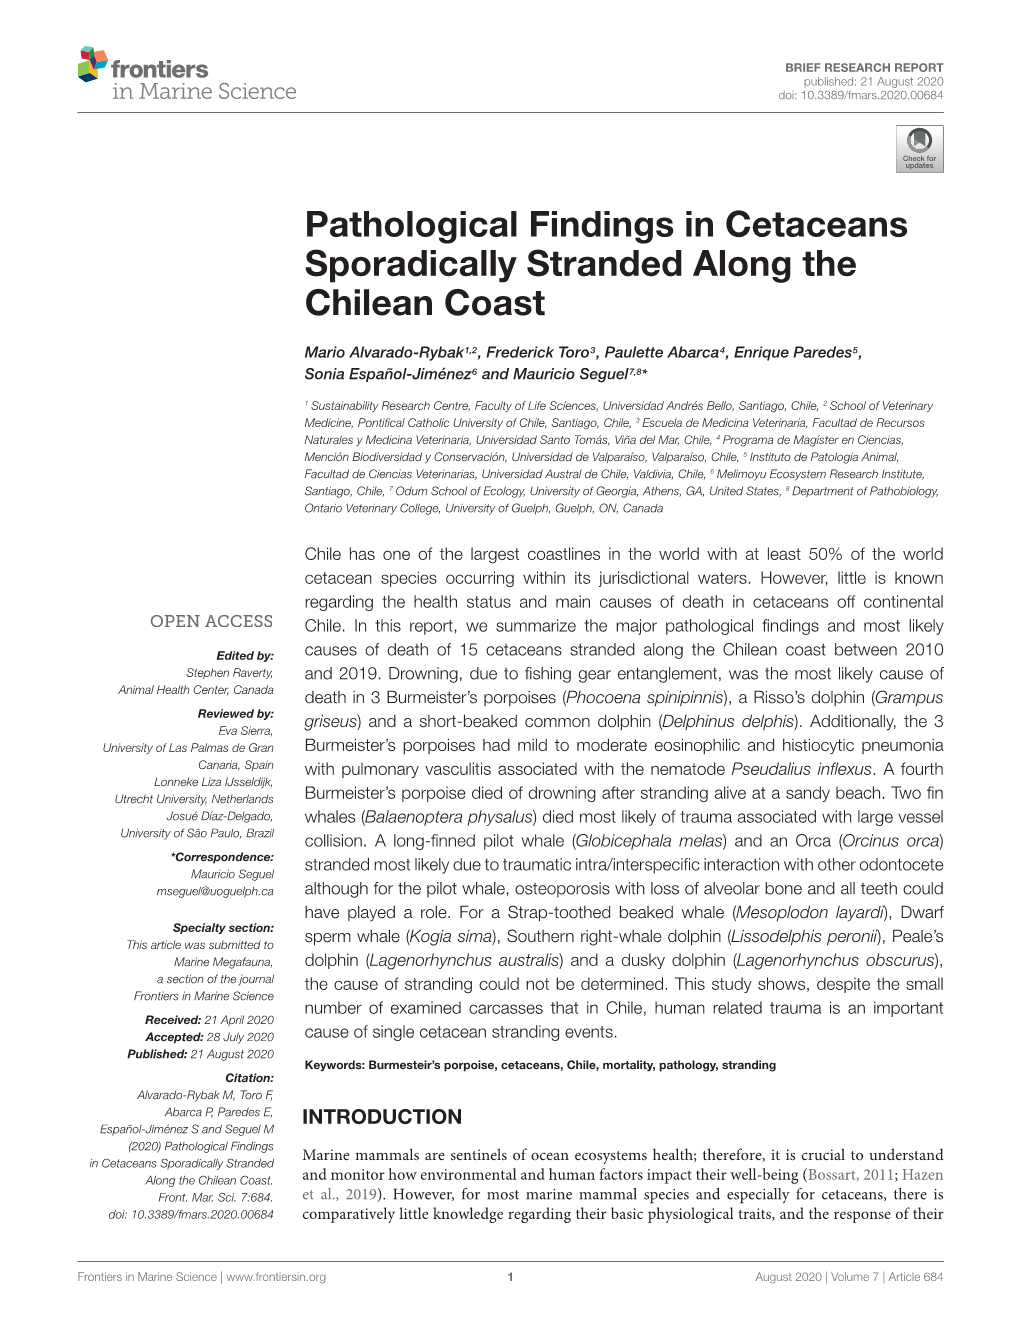 Pathological Findings in Cetaceans Sporadically Stranded Along the Chilean Coast